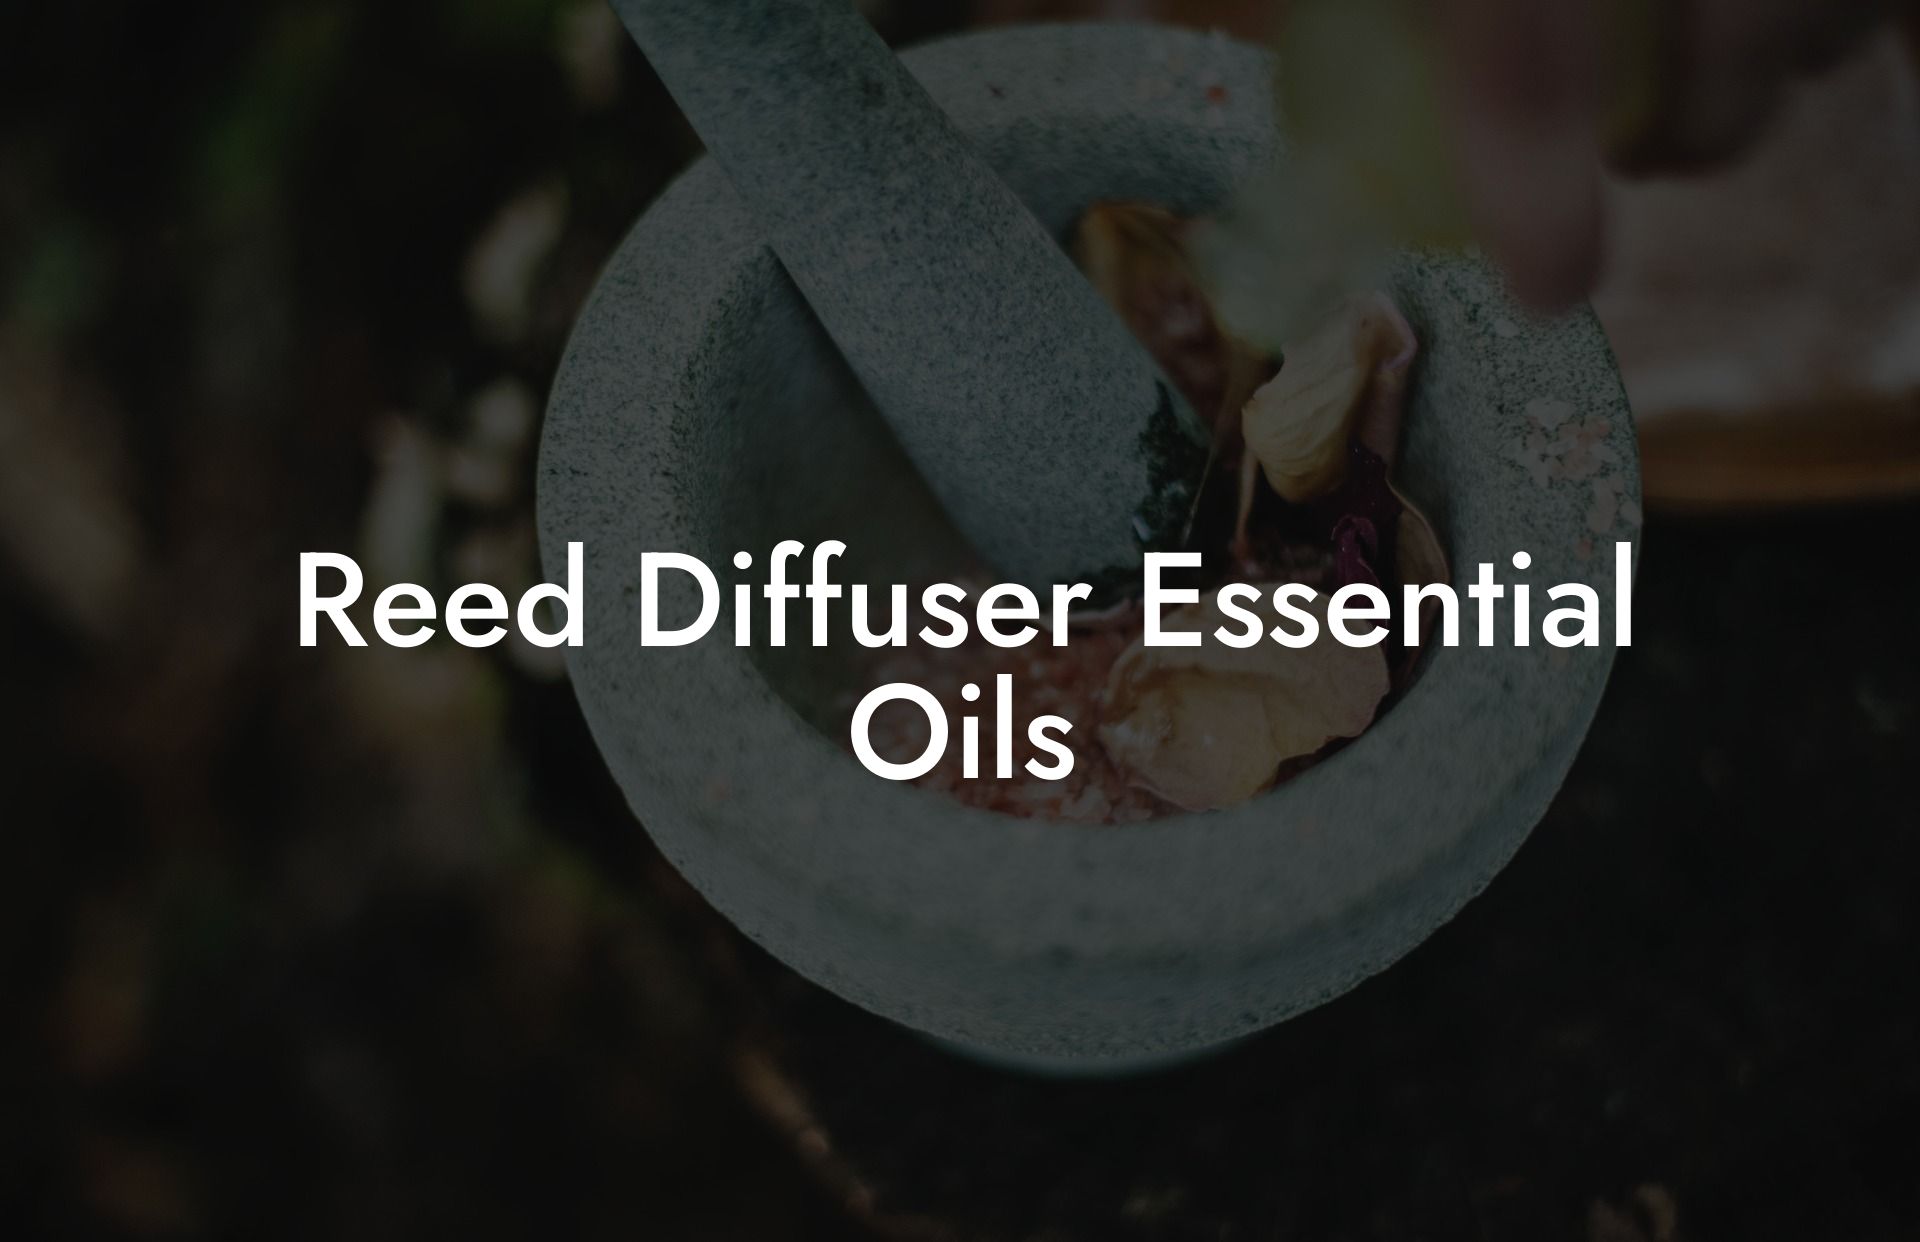 Reed Diffuser Essential Oils